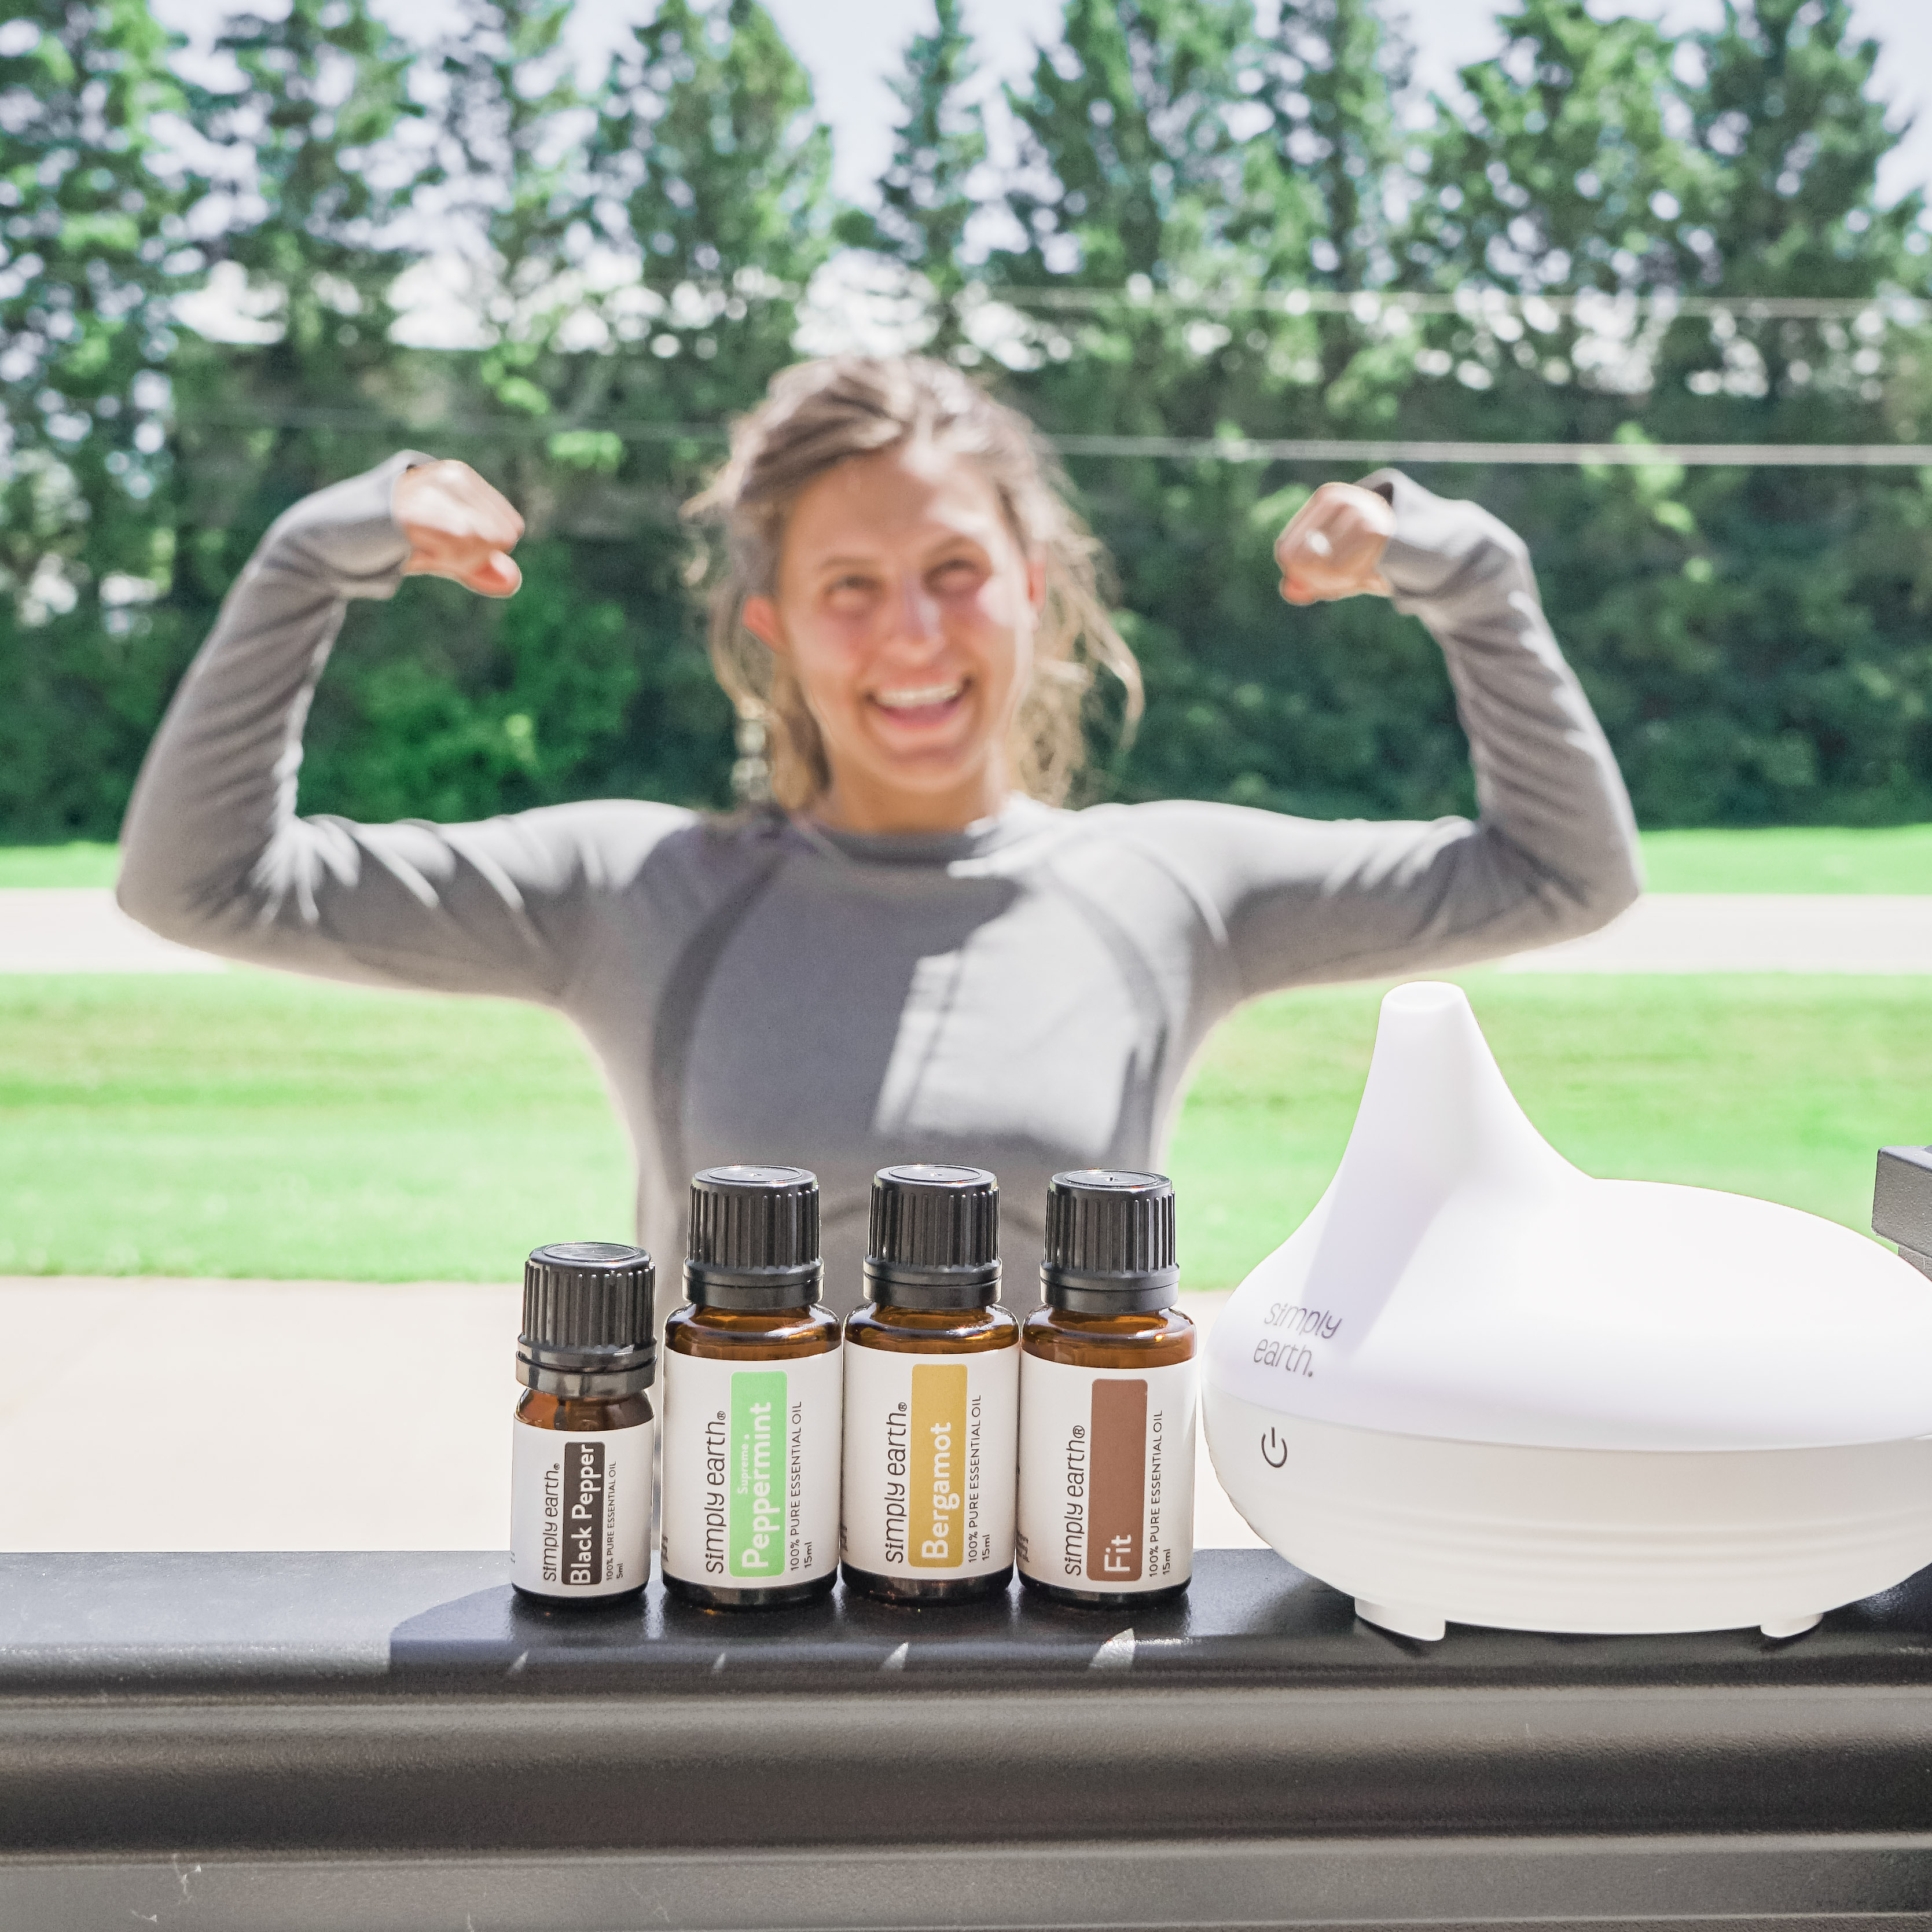 Get Fit With the Fitness Essential Oil Diffuser Set! - Simply